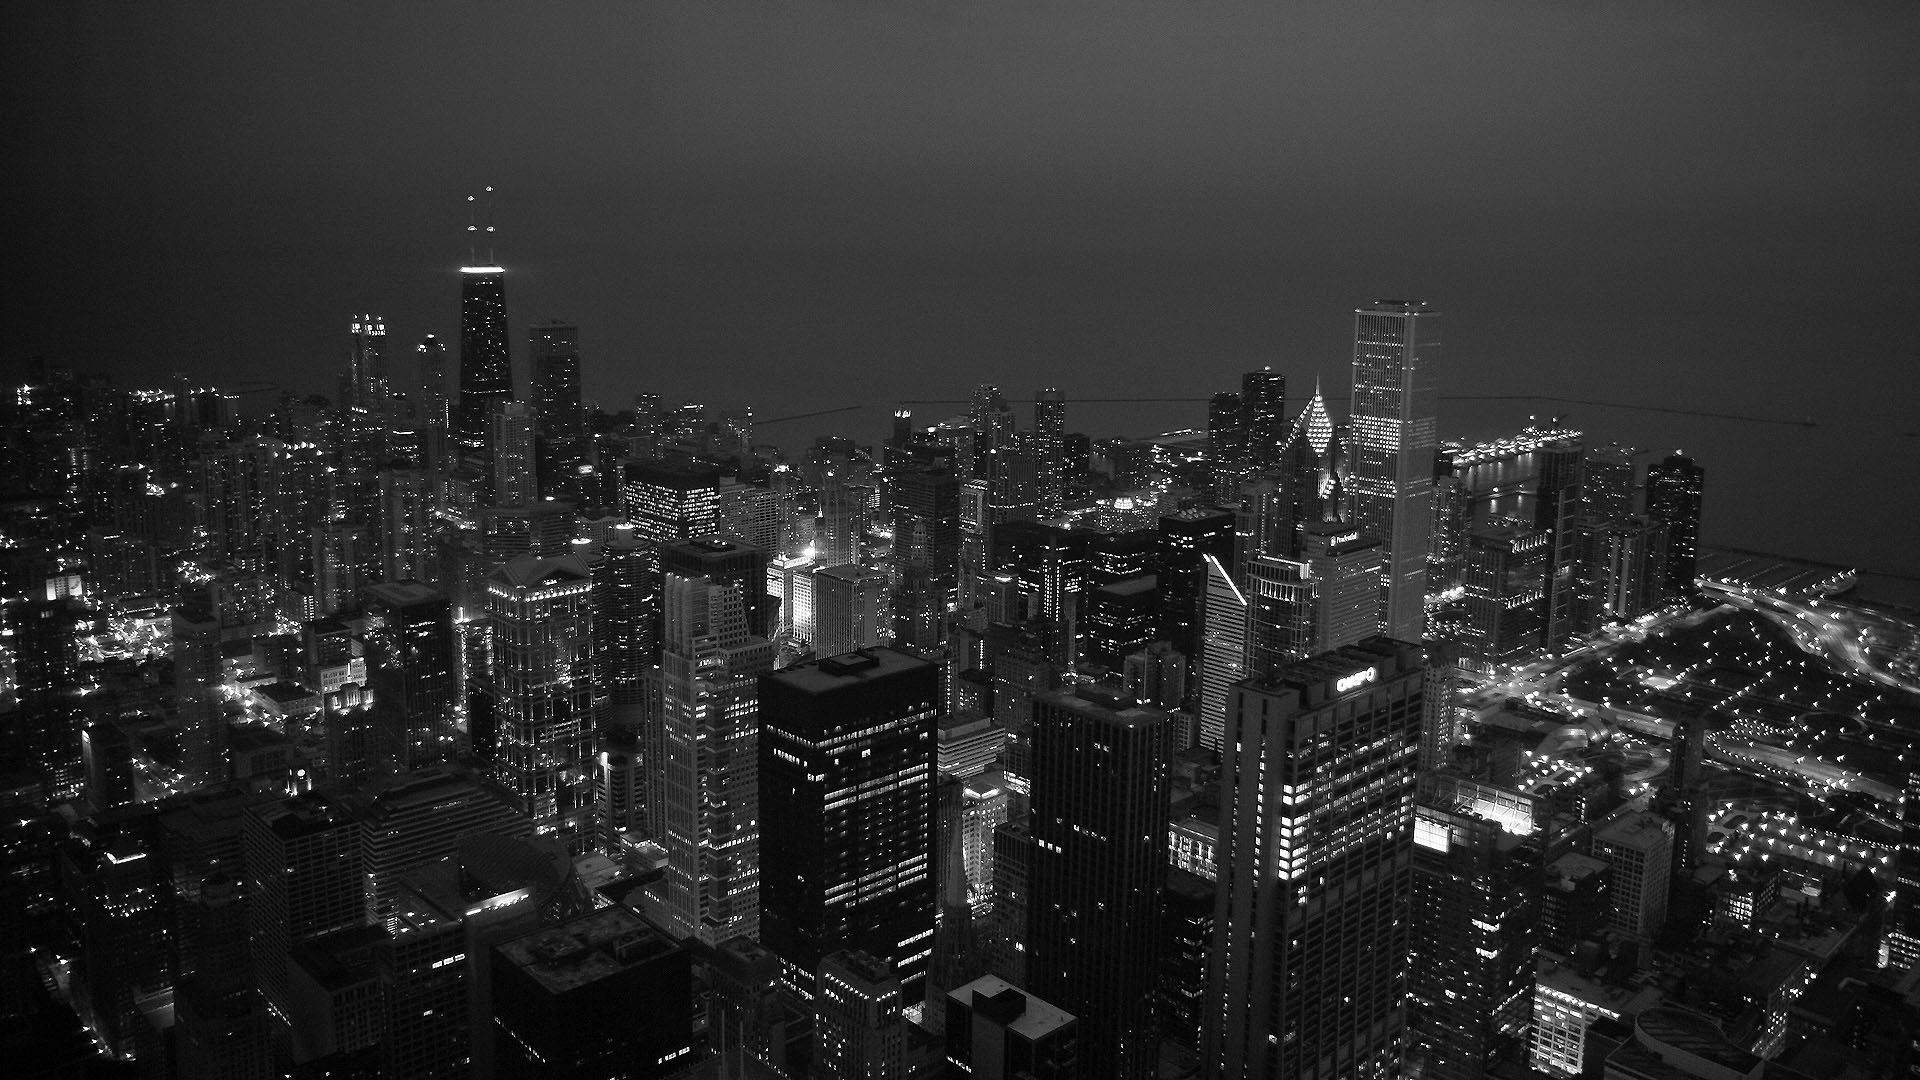 Black And White Aesthetic City At Night Wallpaper